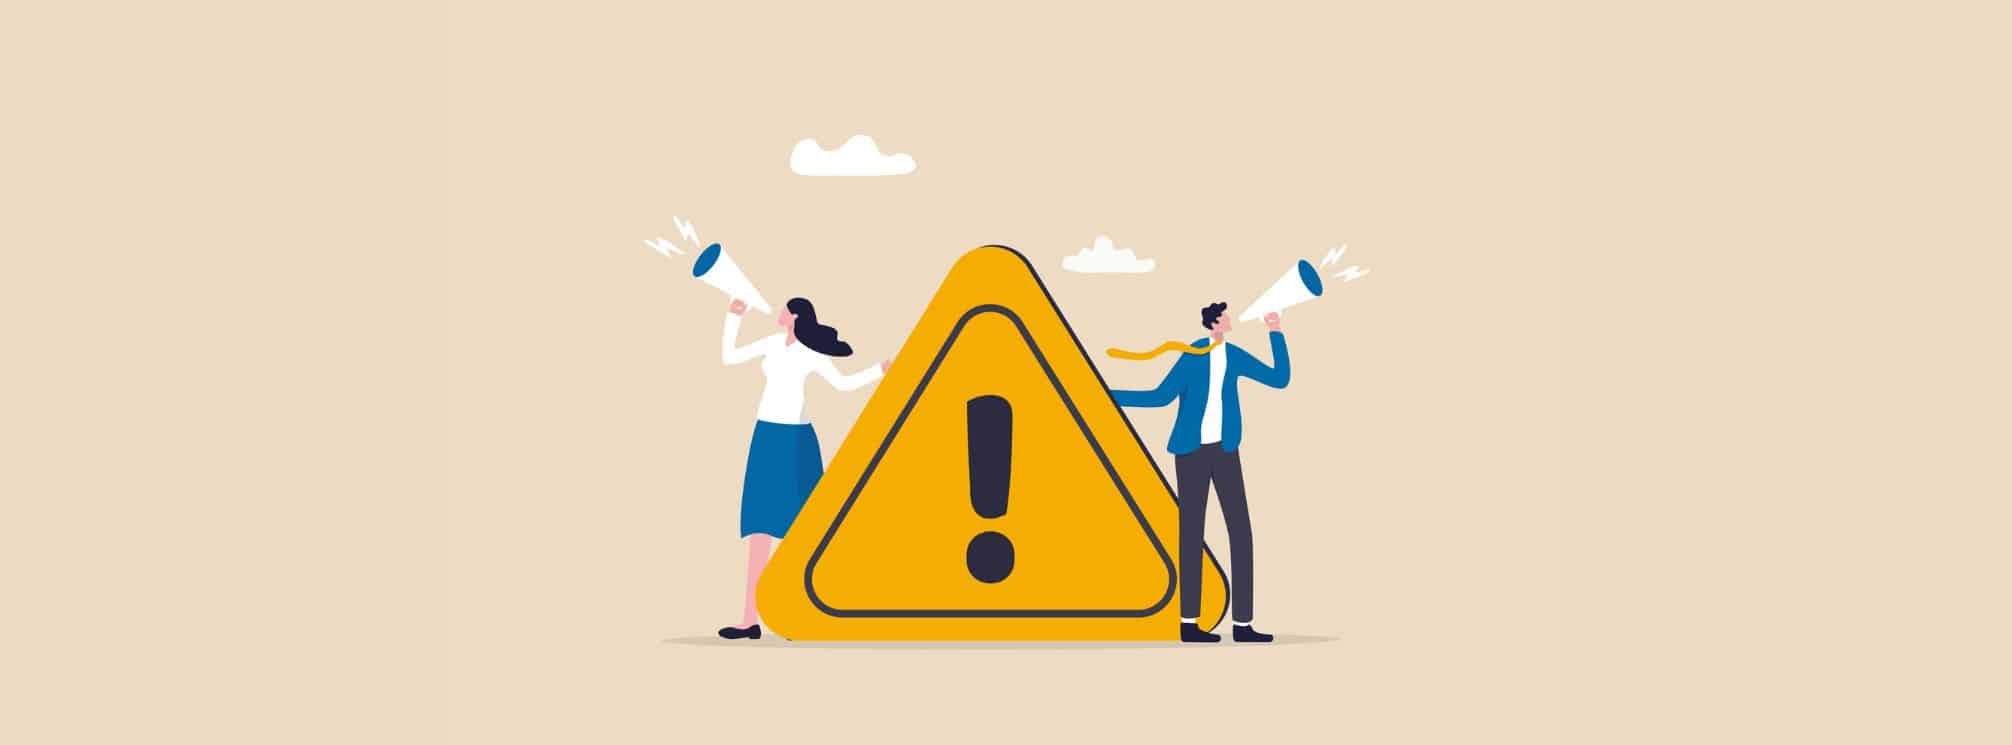 illustration of two business people speaking into megaphones with an alert notification icon between them